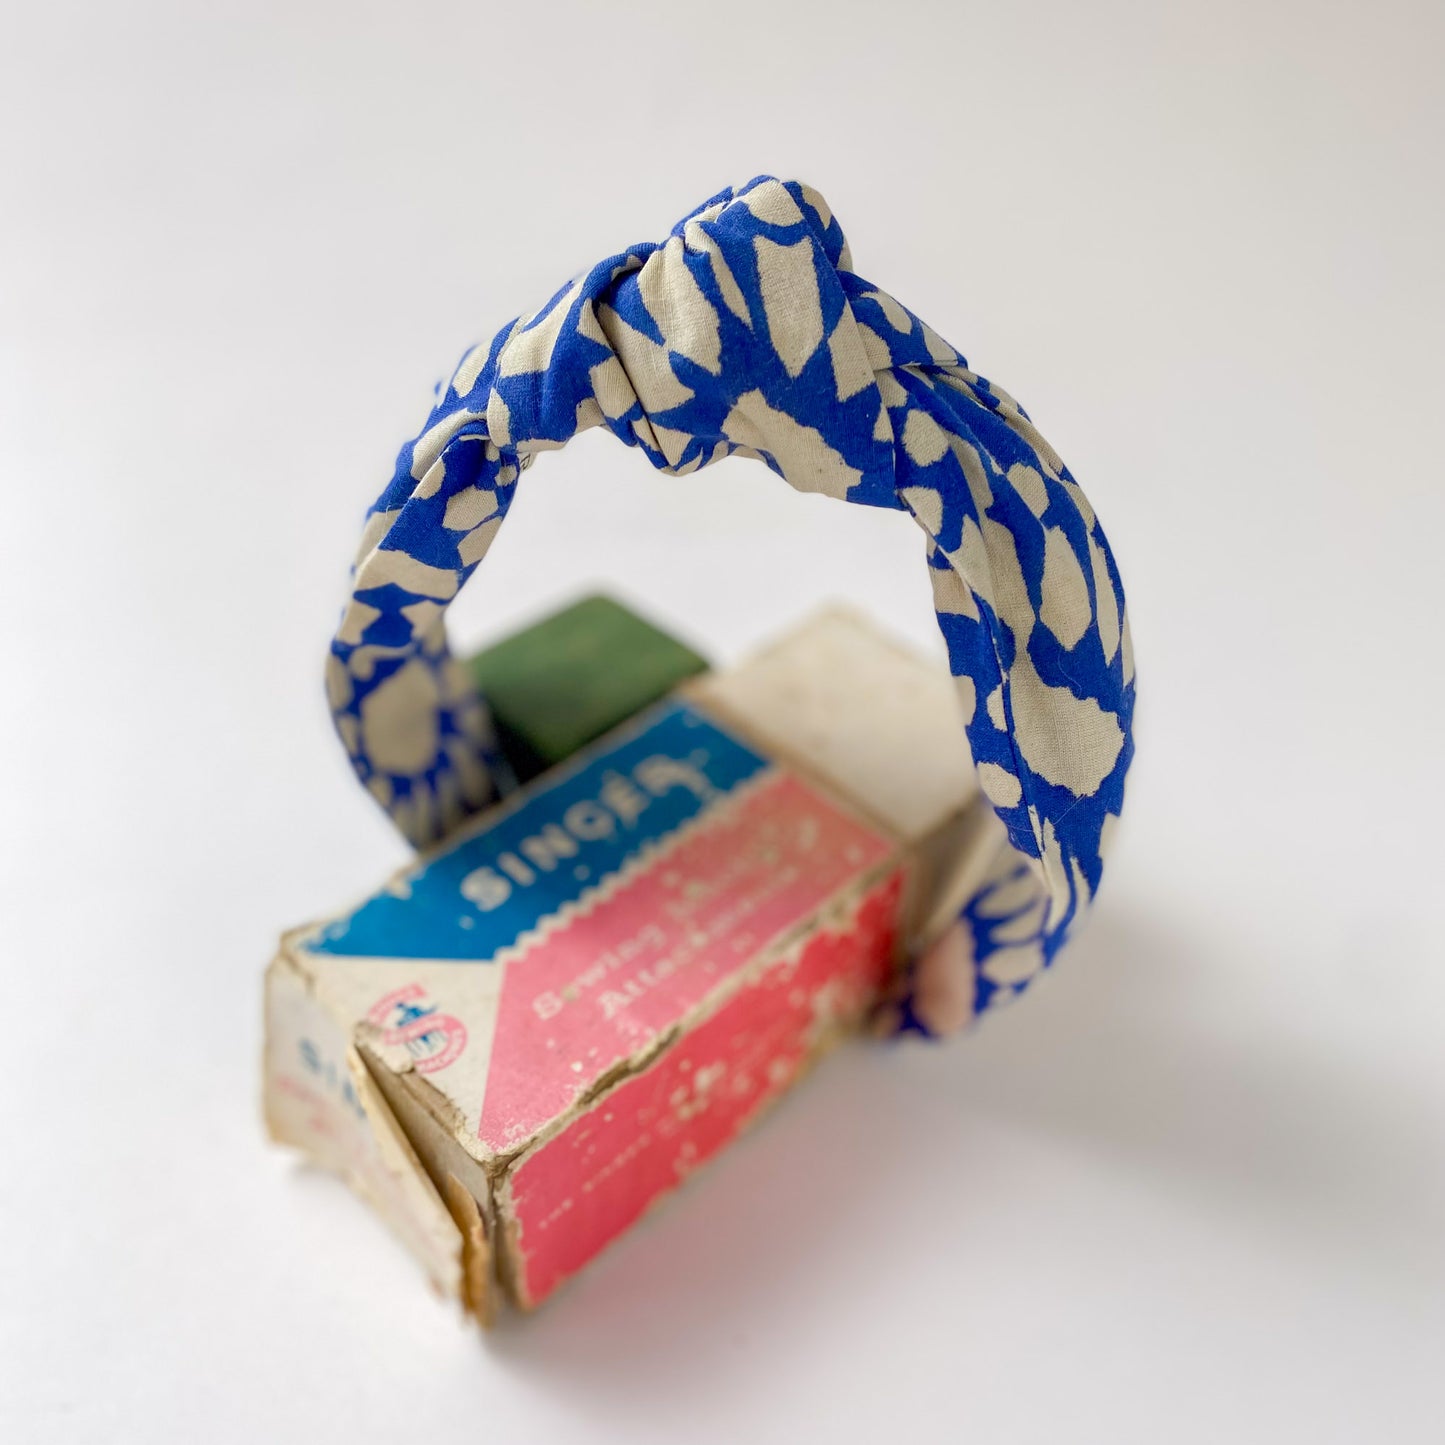 Amelie Hairband - Paper Blue